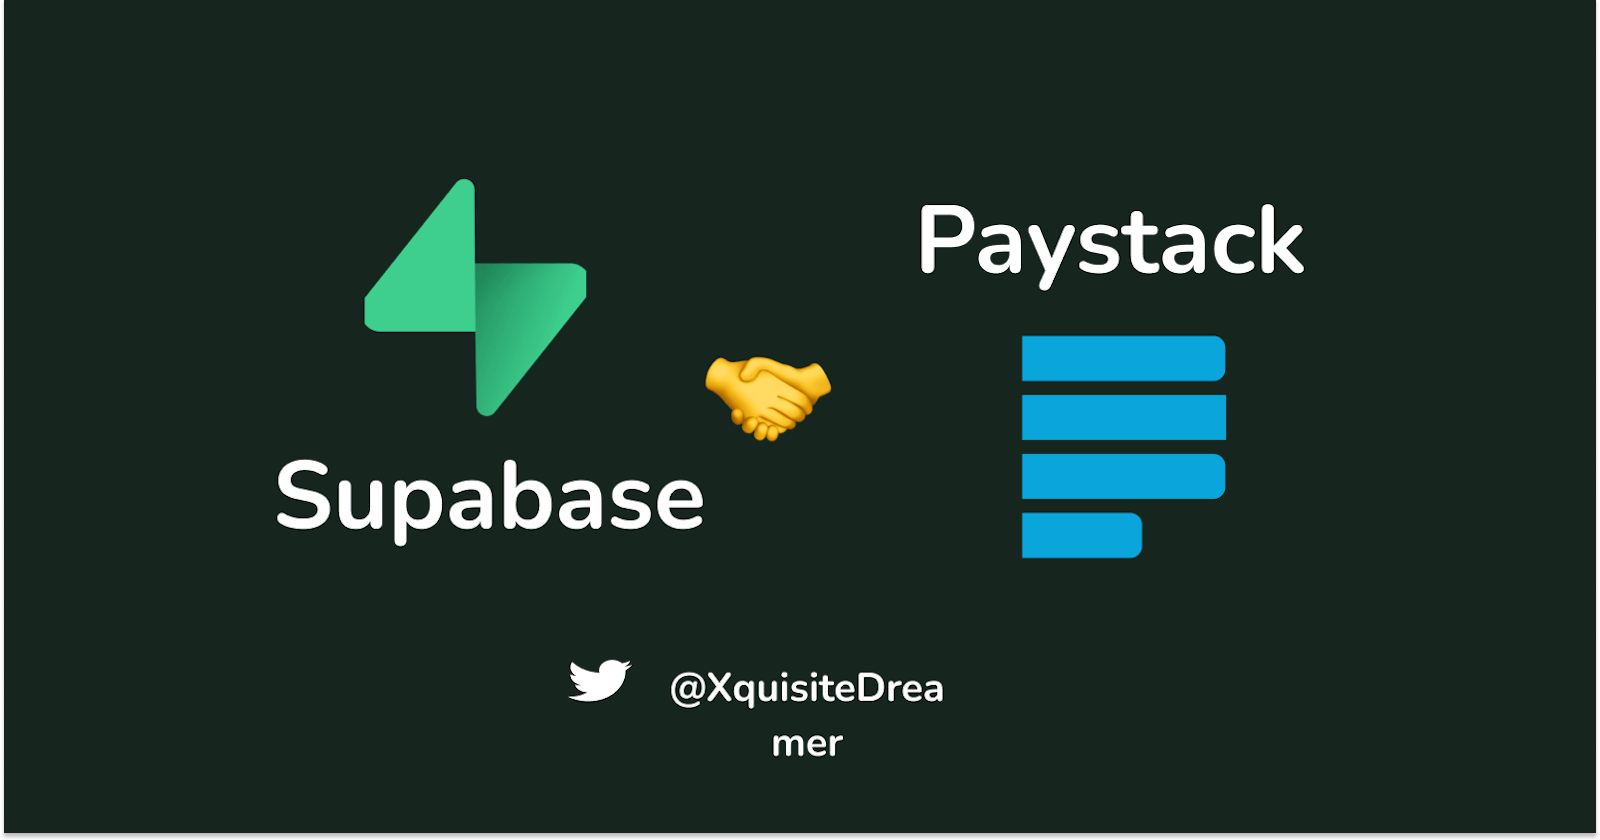 Accept Payments For Your African-Based Business Using Supabase Edge Functions and Paystack